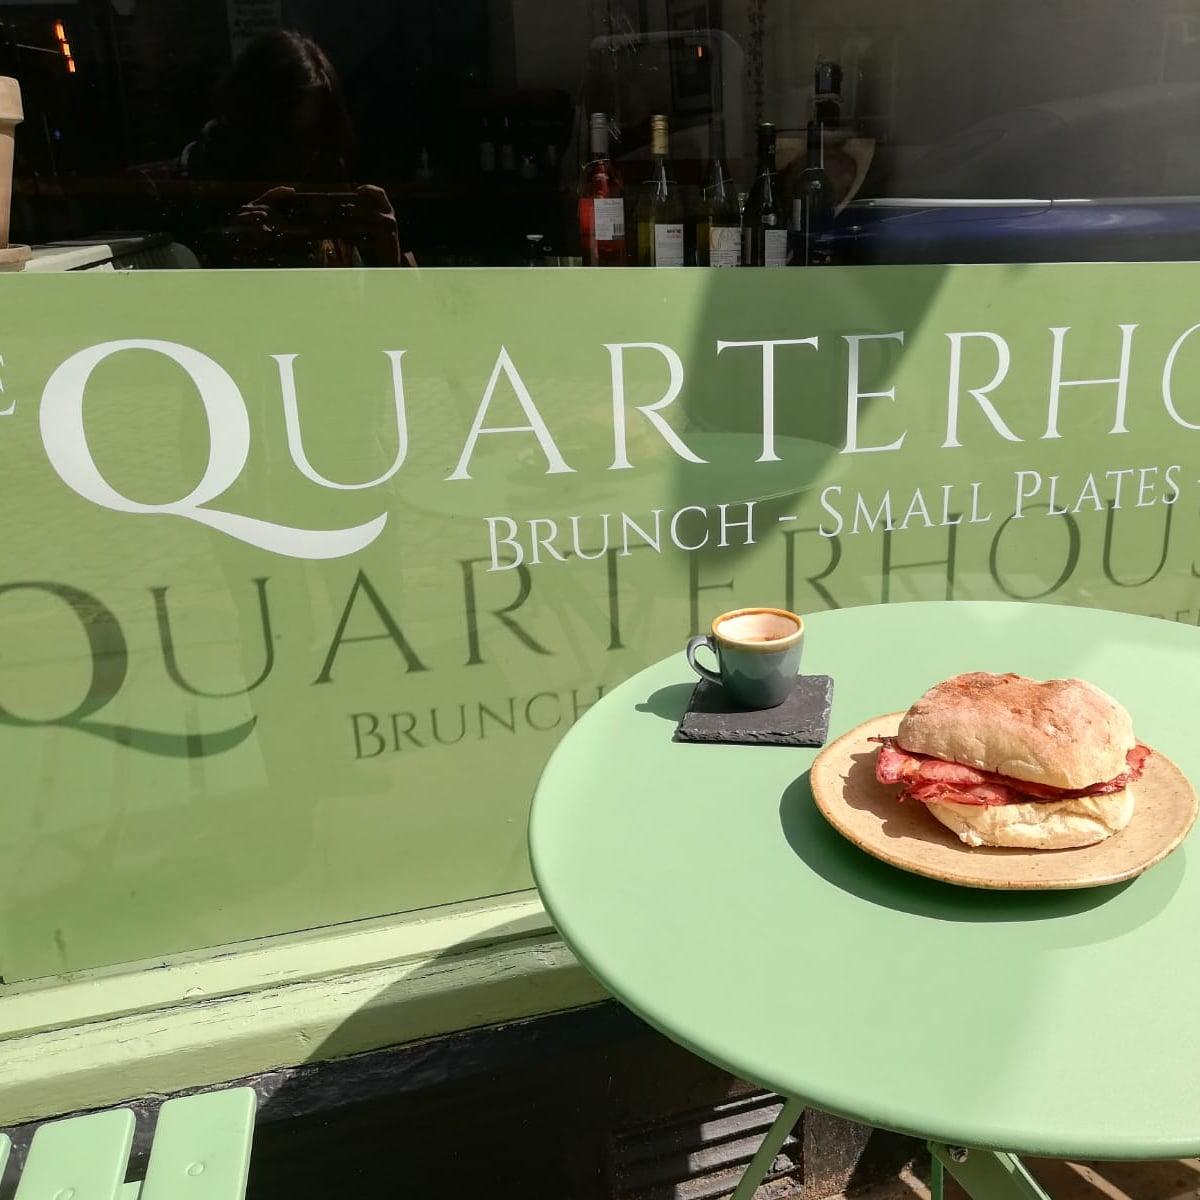 Images from The Quarterhouse